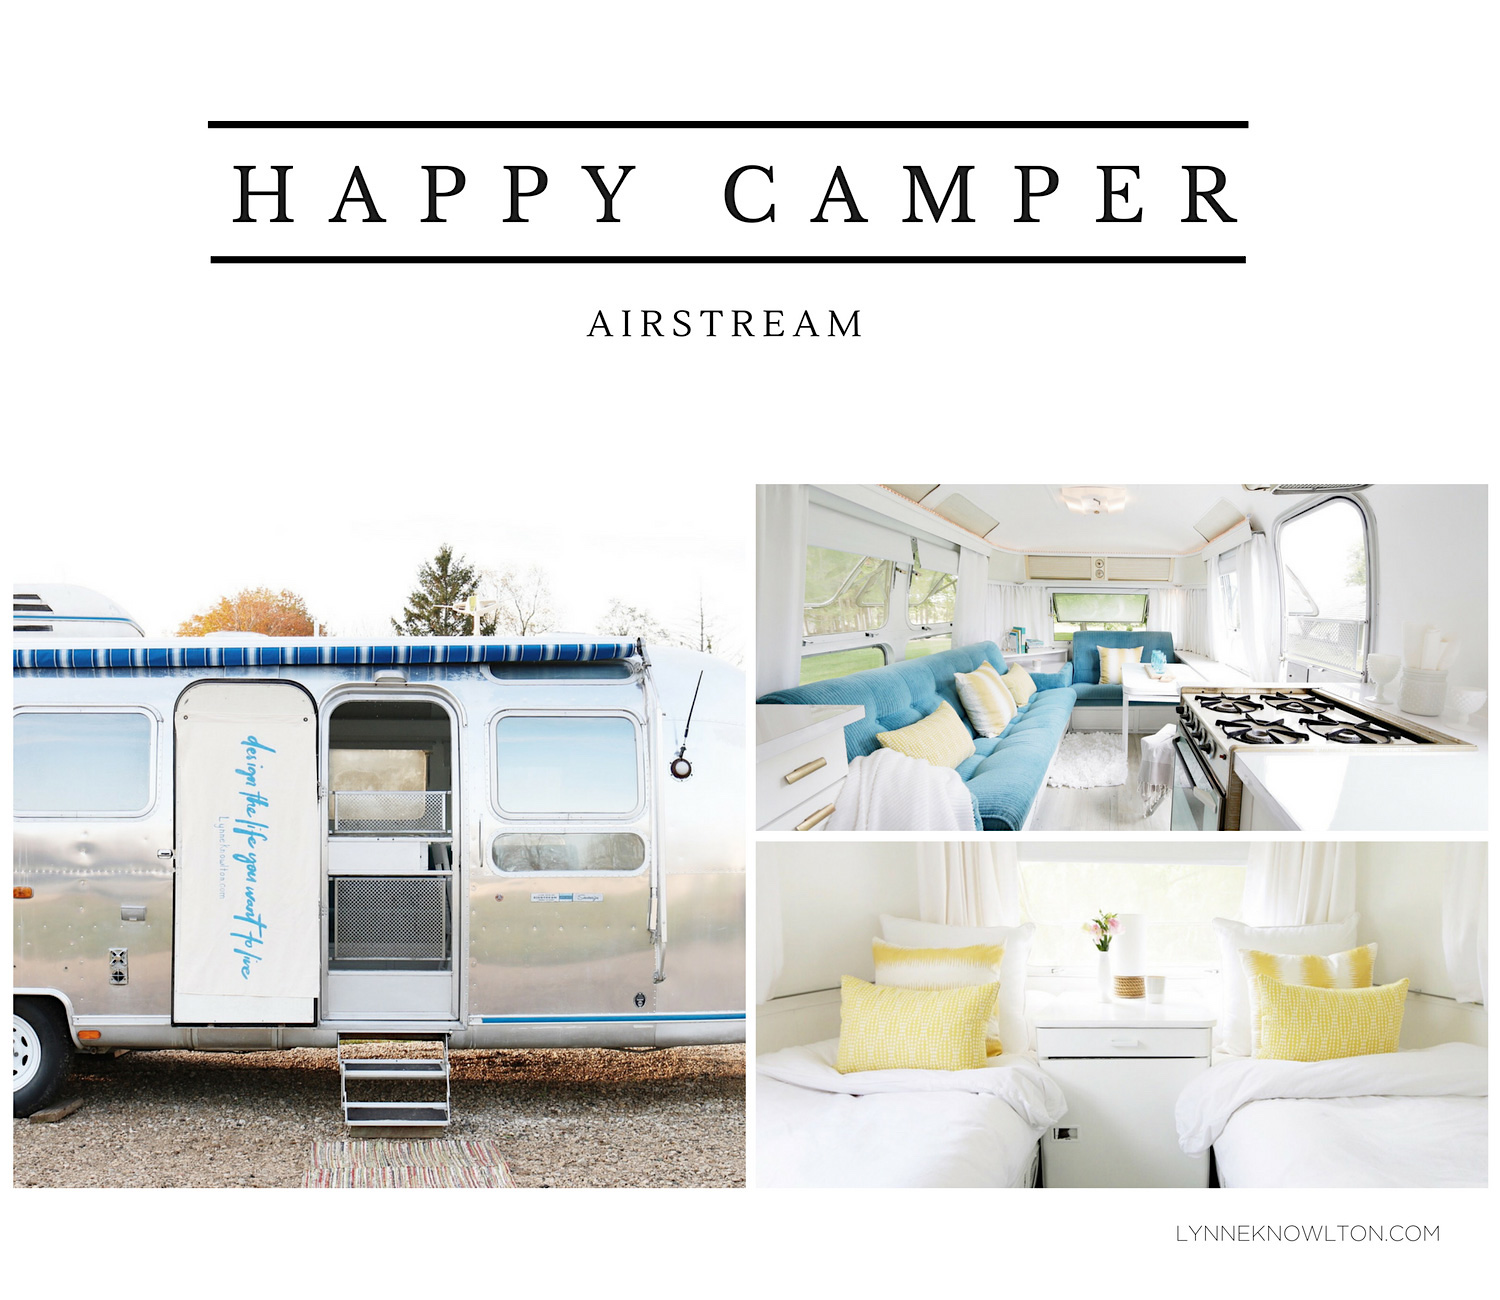 See the before & after transformation of this vintage airstream by @lynneknowlton !